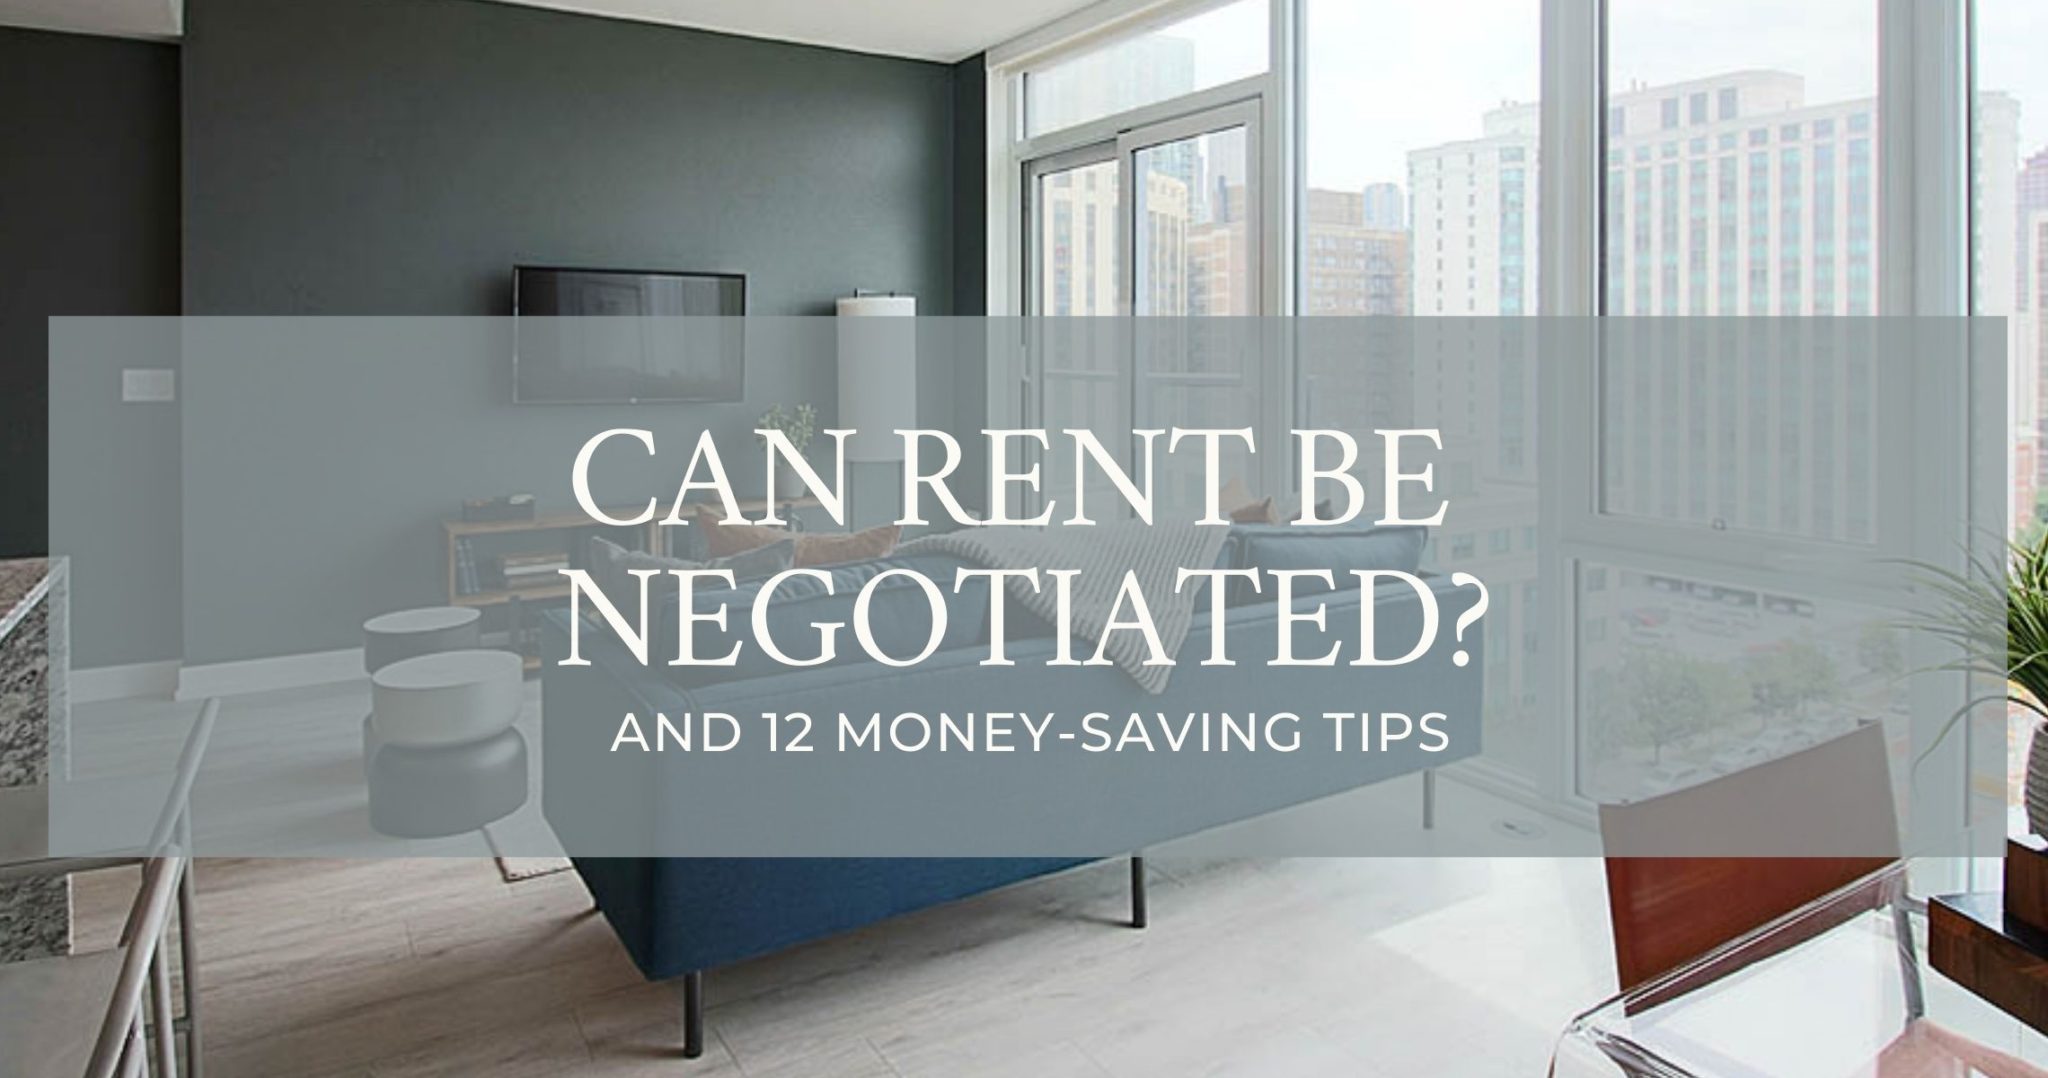 Can apartment rent be negotiated